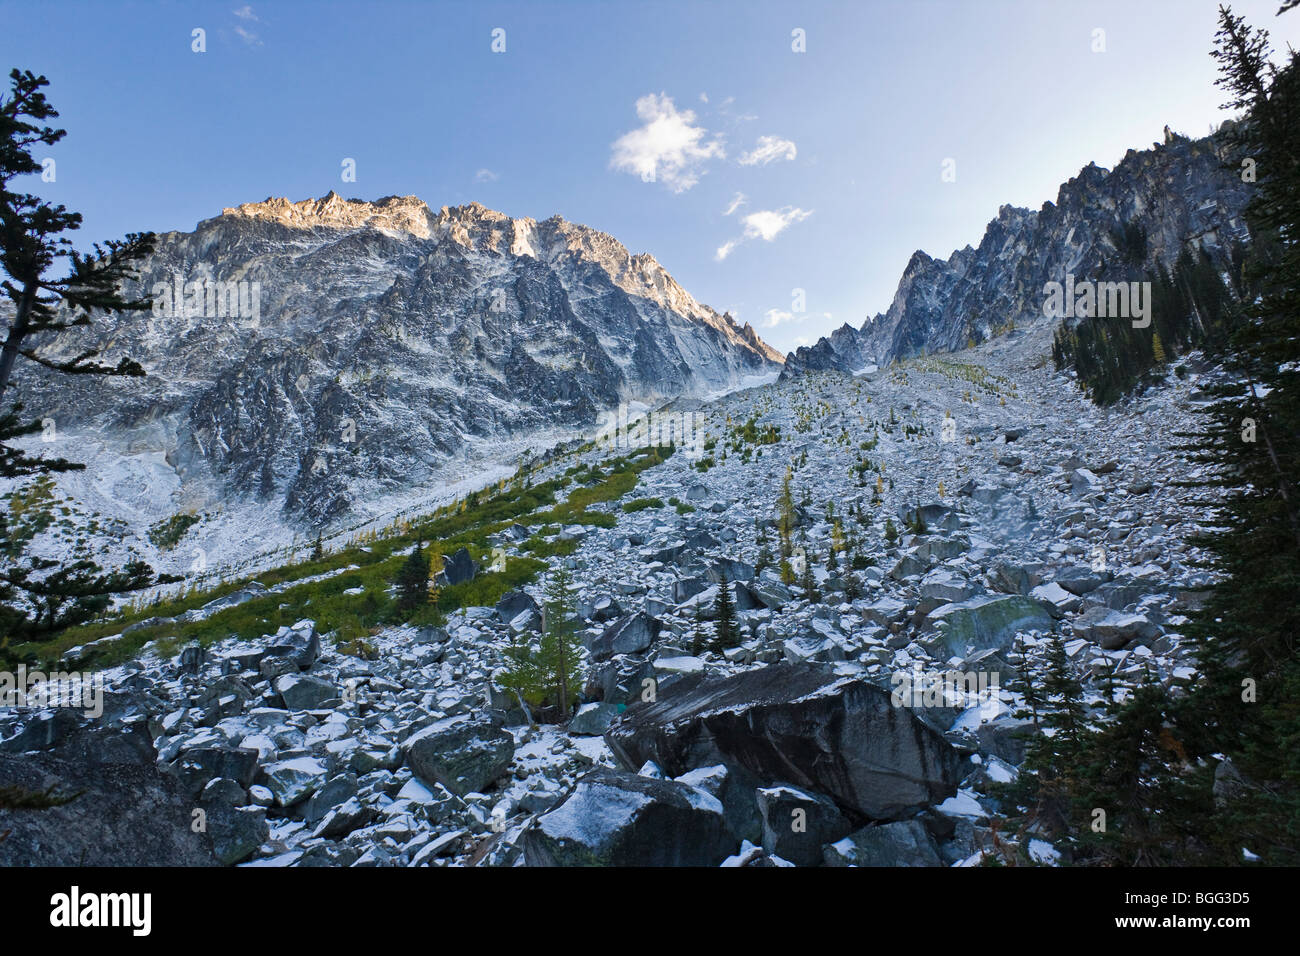 Dragontail Peak and the boulder / talus field above Colchuck Lake covered in an Autumn snow, Washington Cascades, USA. Stock Photo